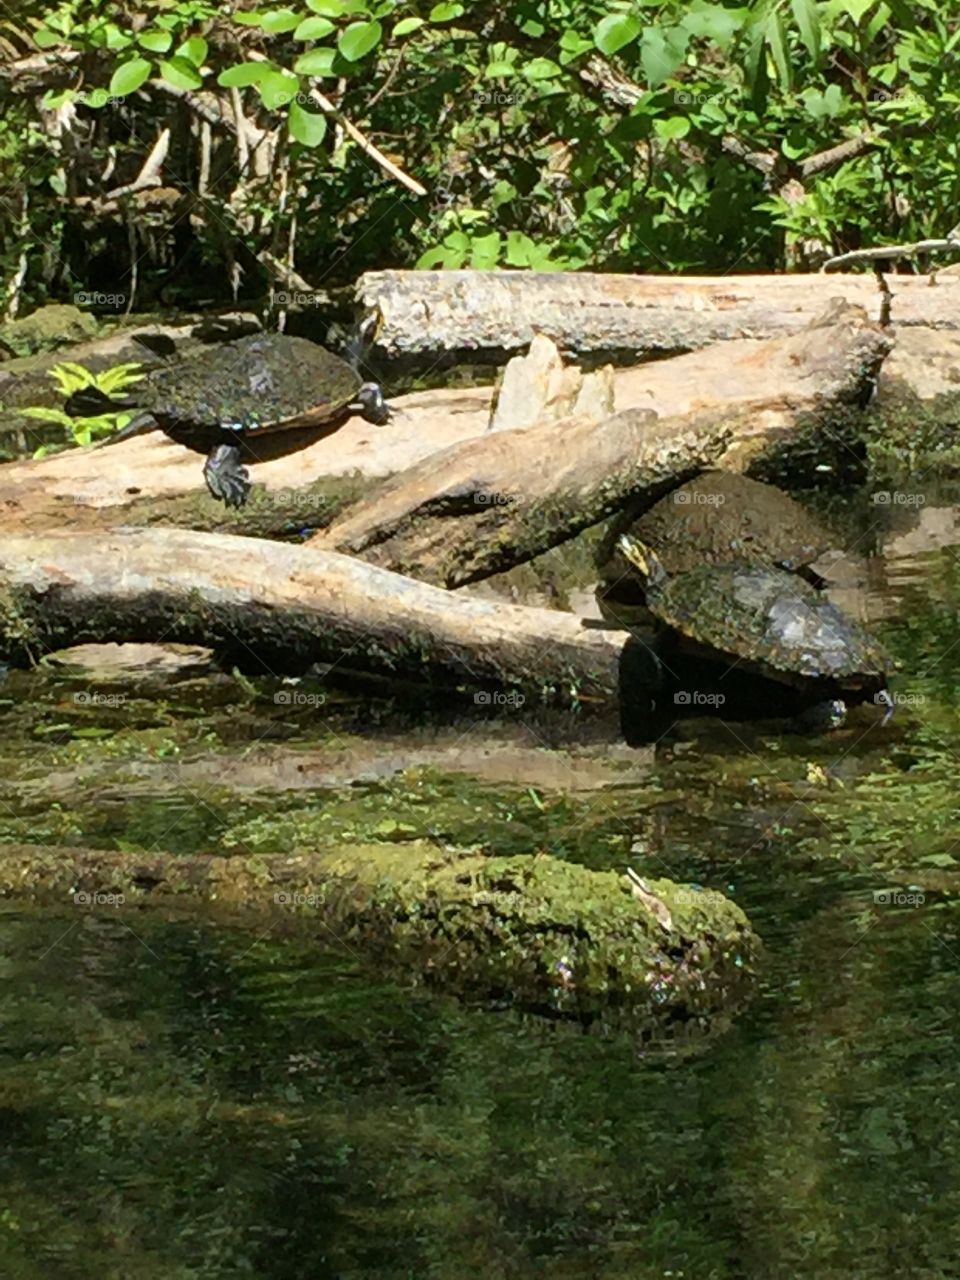 Turtles sunning on the river